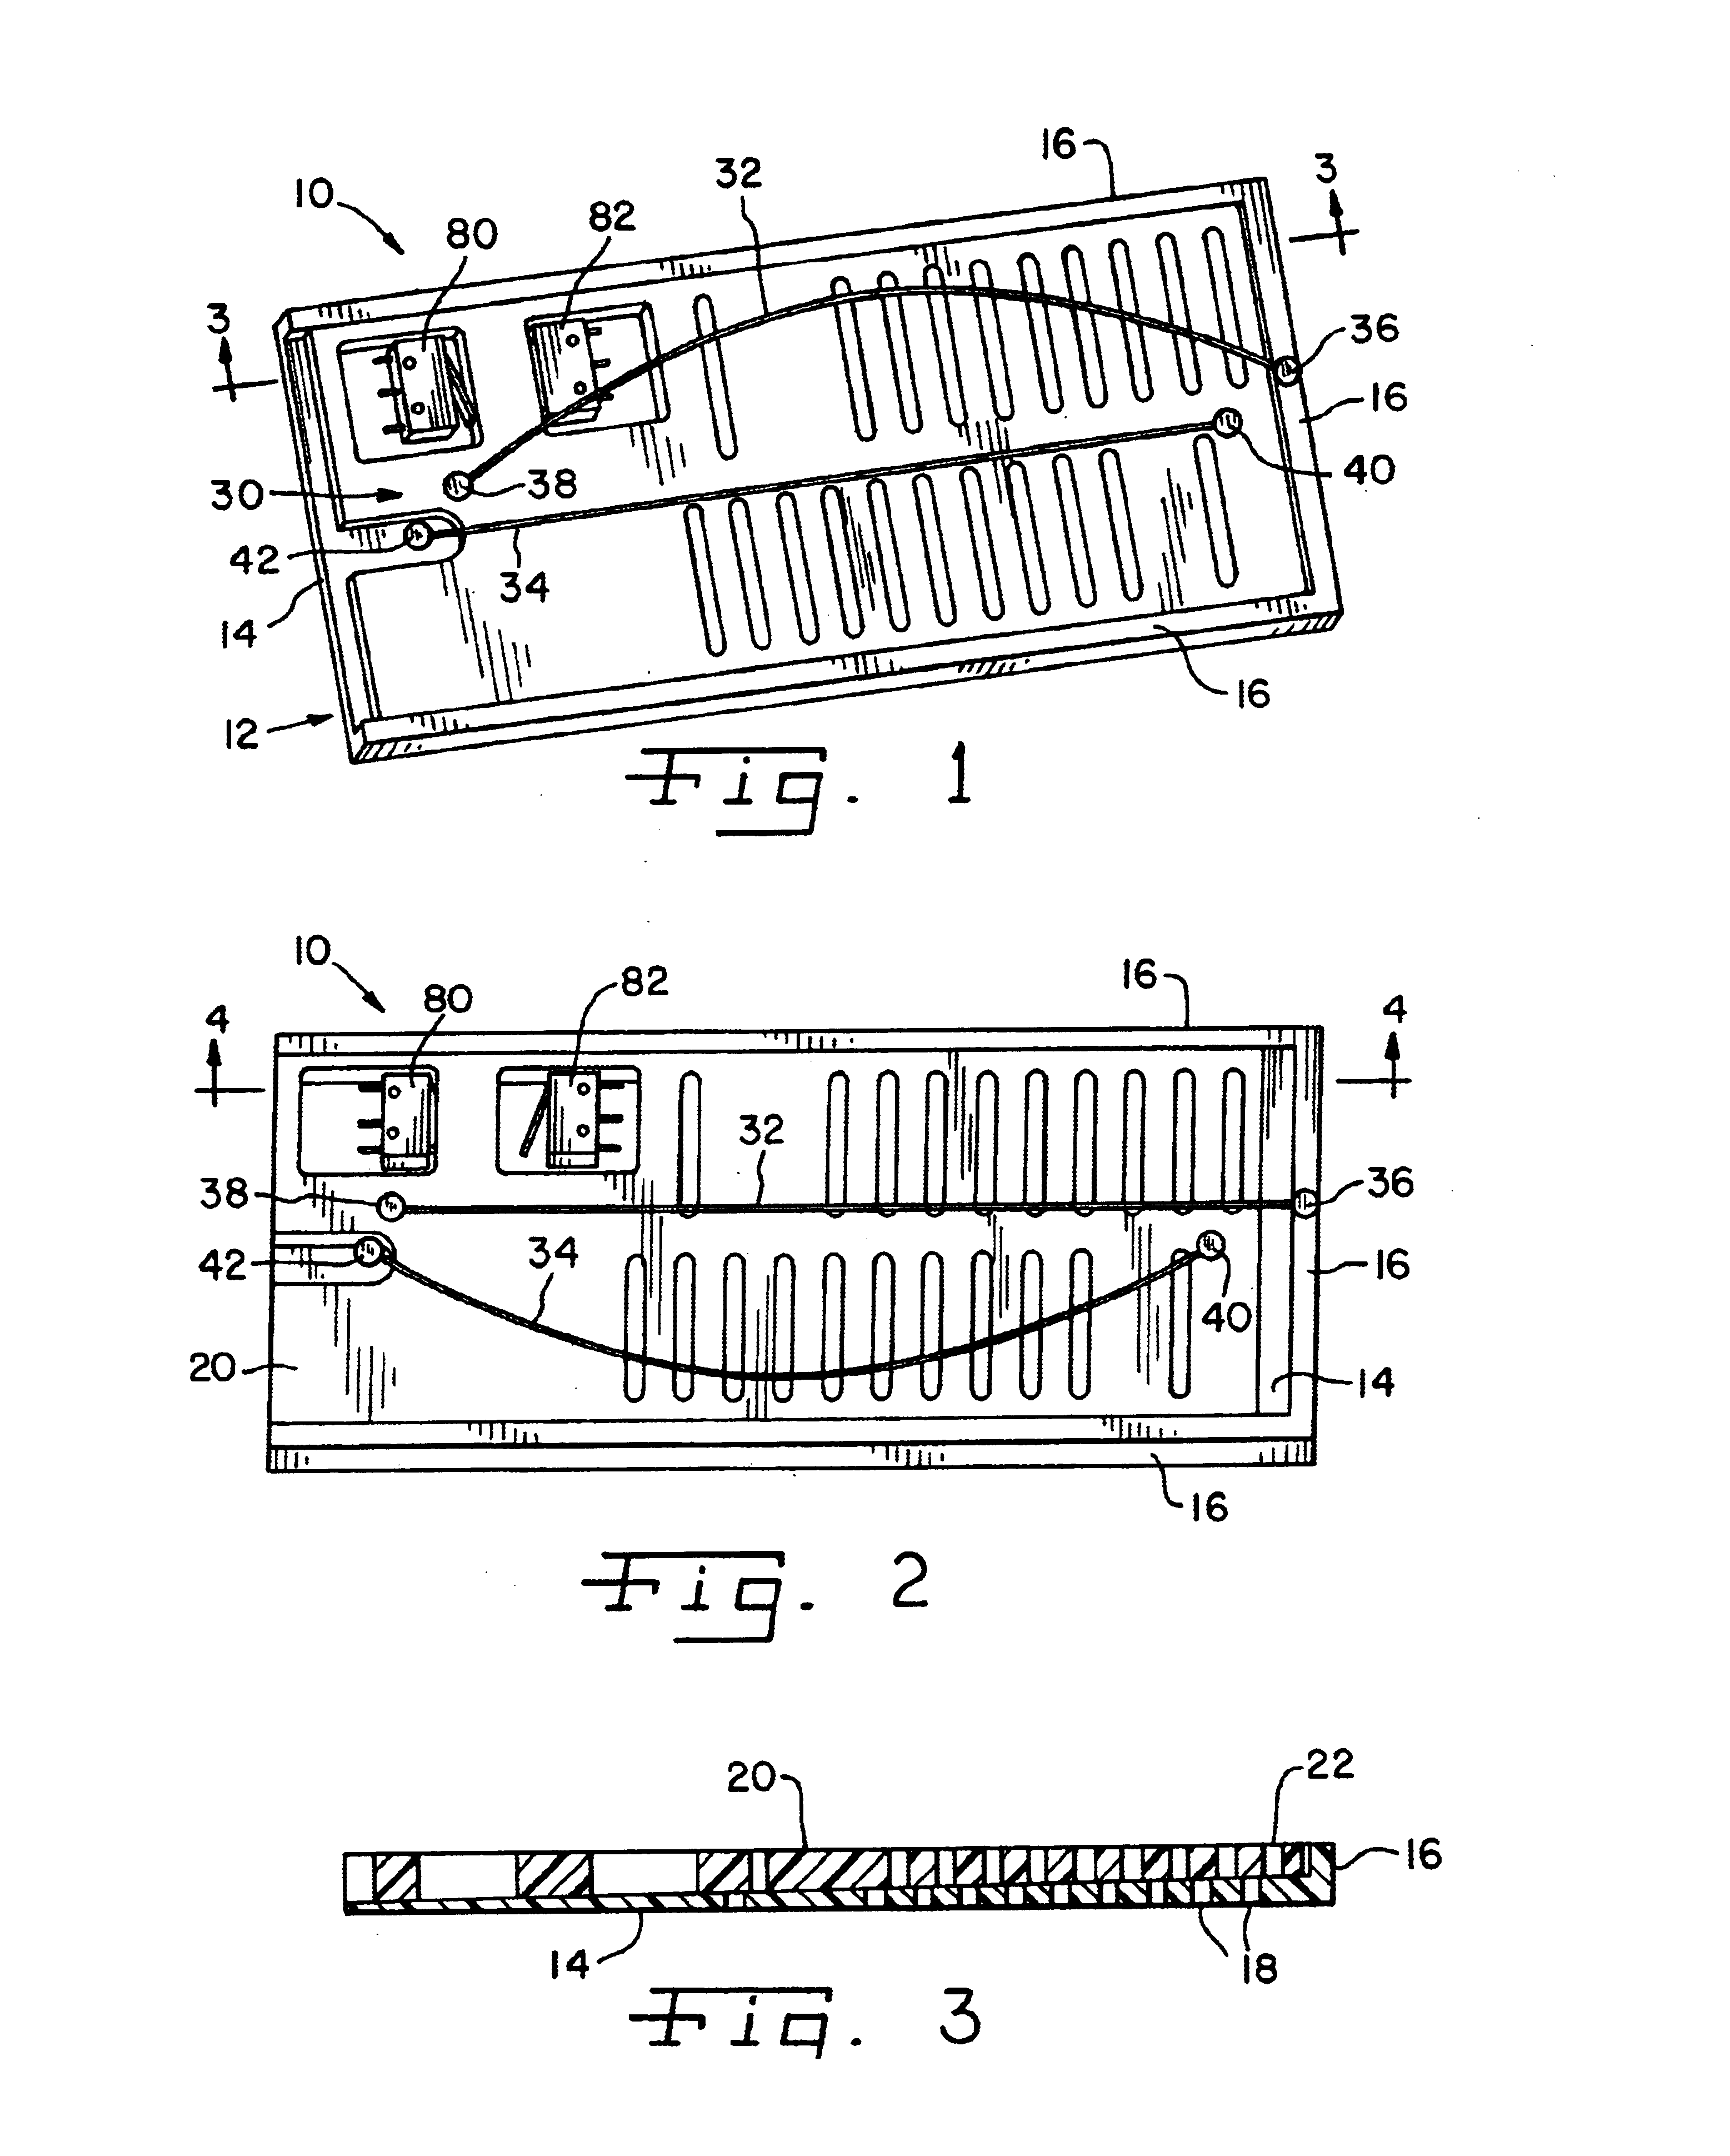 Airflow control device